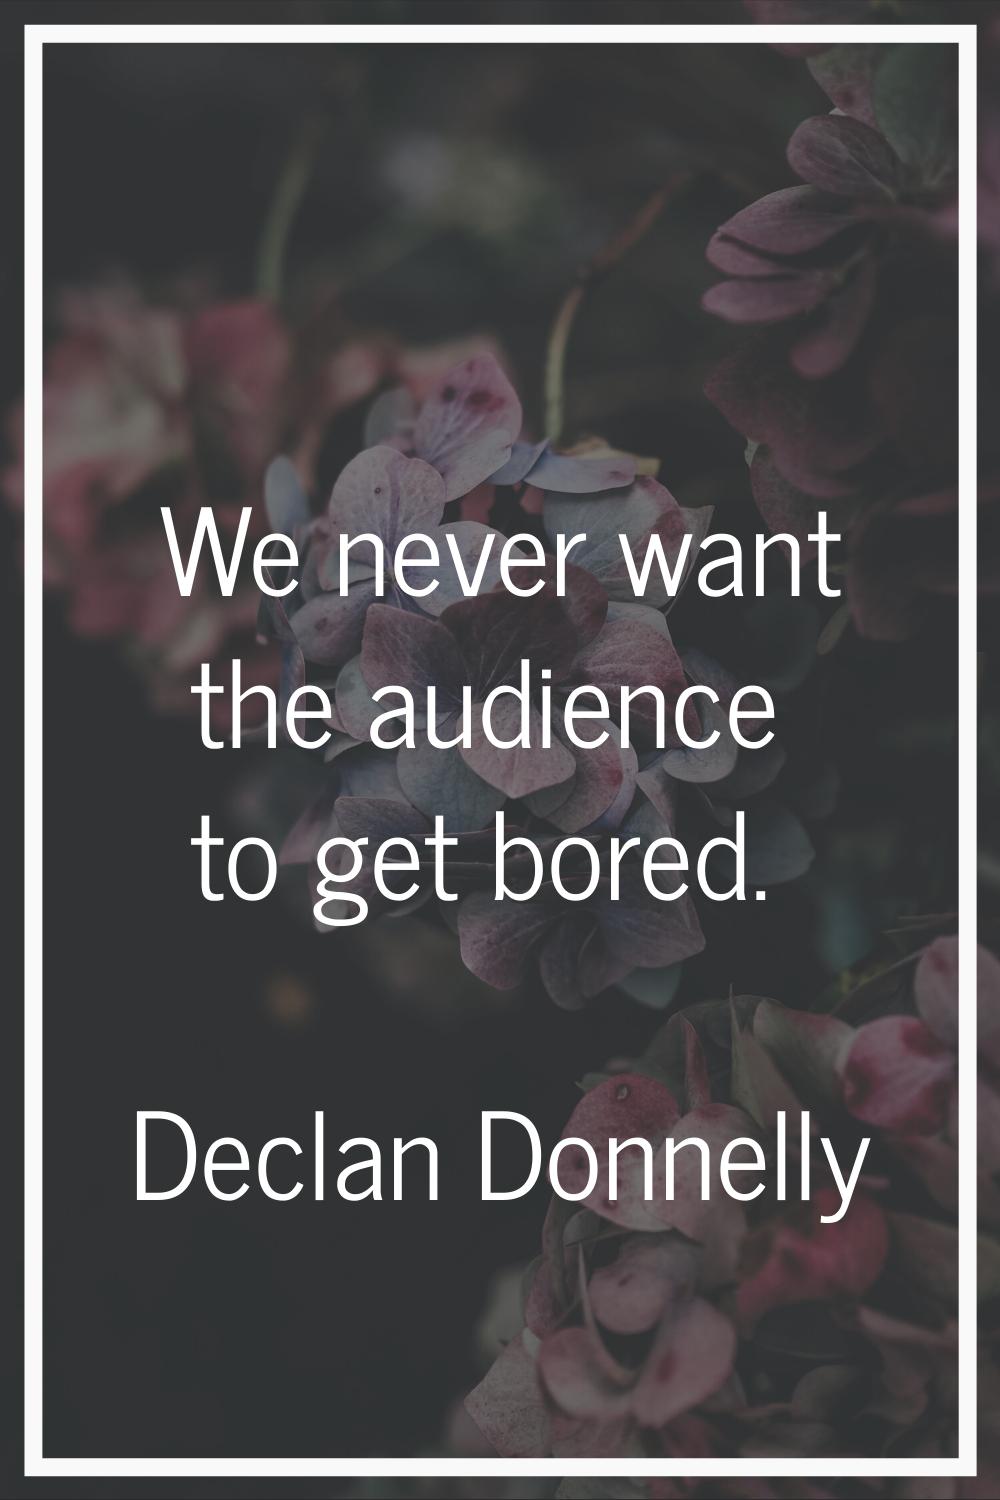 We never want the audience to get bored.